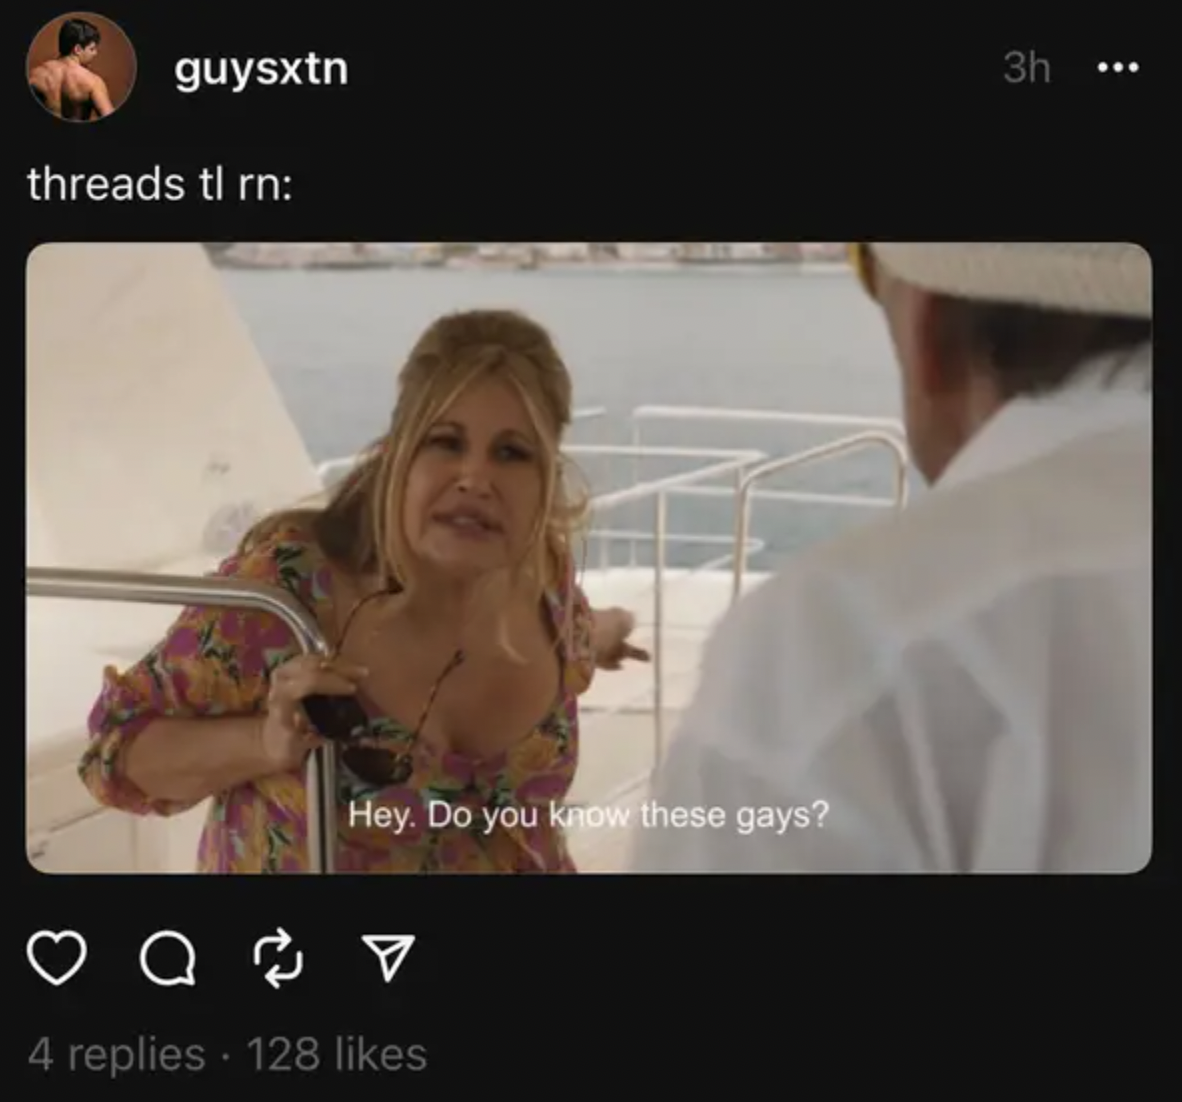 best threads of the week - jennifer coolidge white lotus boat - guysxtn threads tl rn Hey. Do you know these gays? 4 replies 128 3h